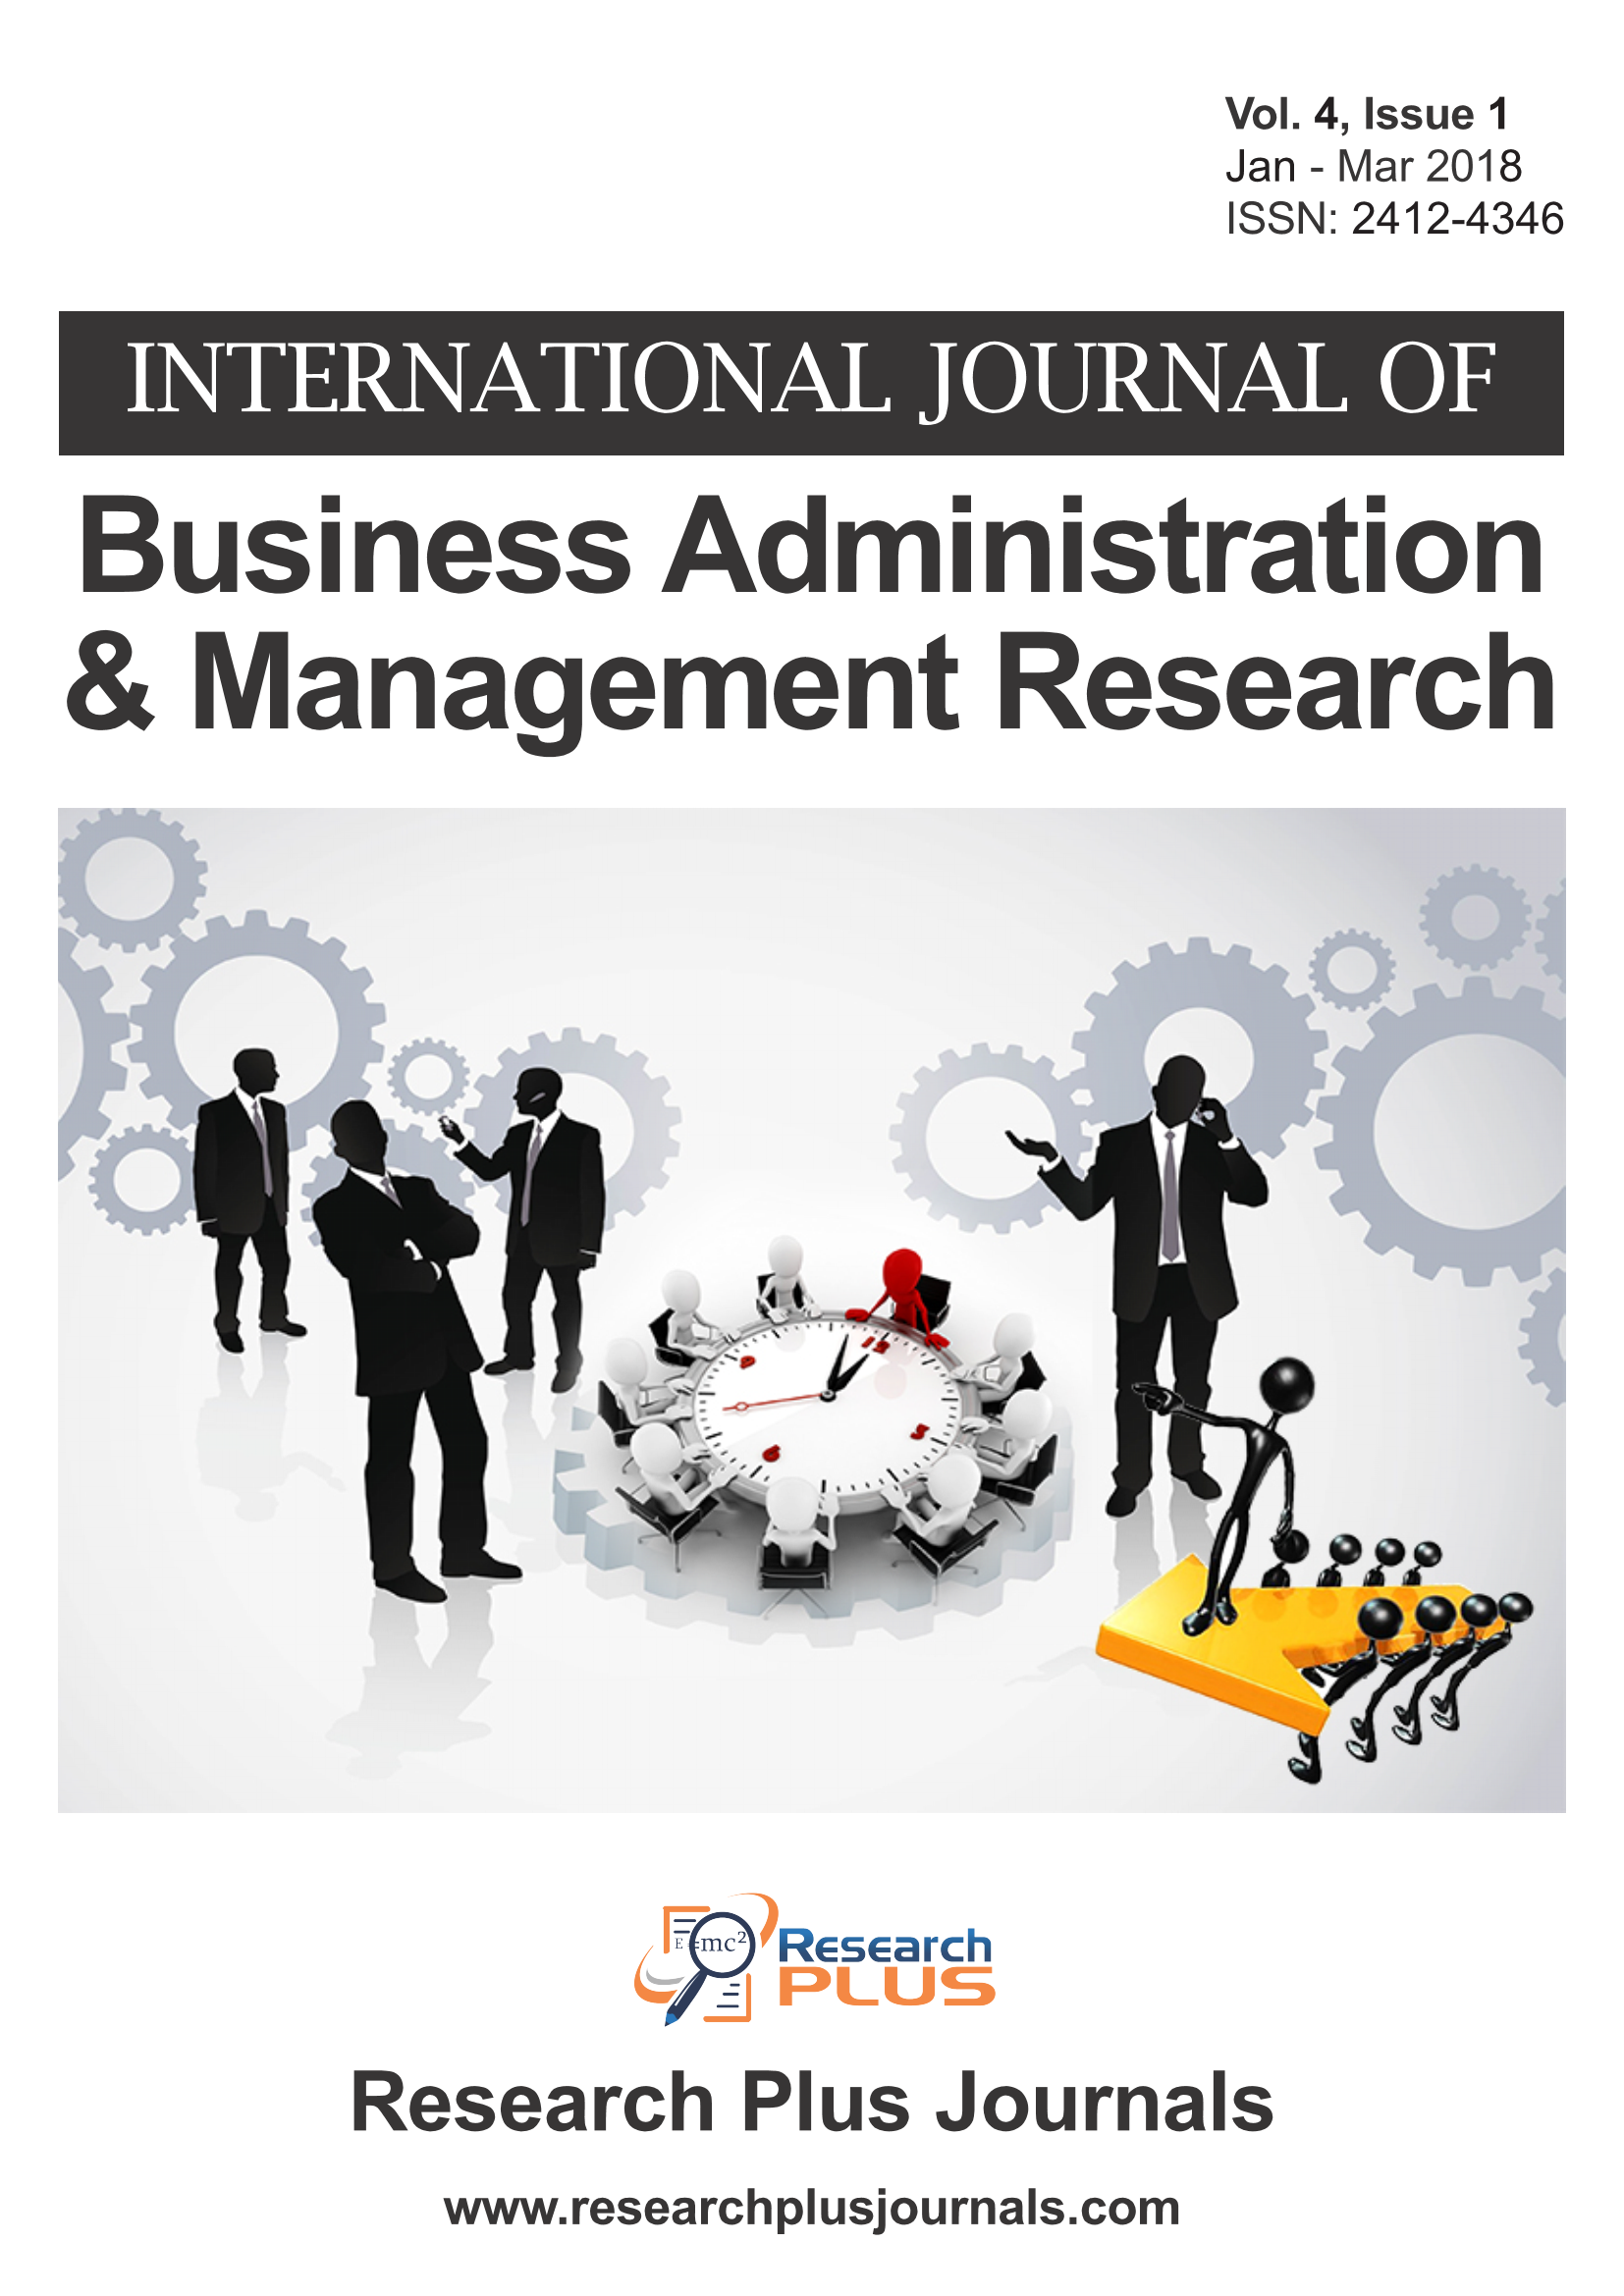 Volume 4, Issue 1, International Journal of Business Administration and Management Research (IJBAMR) (Online ISSN: 2412-4346)